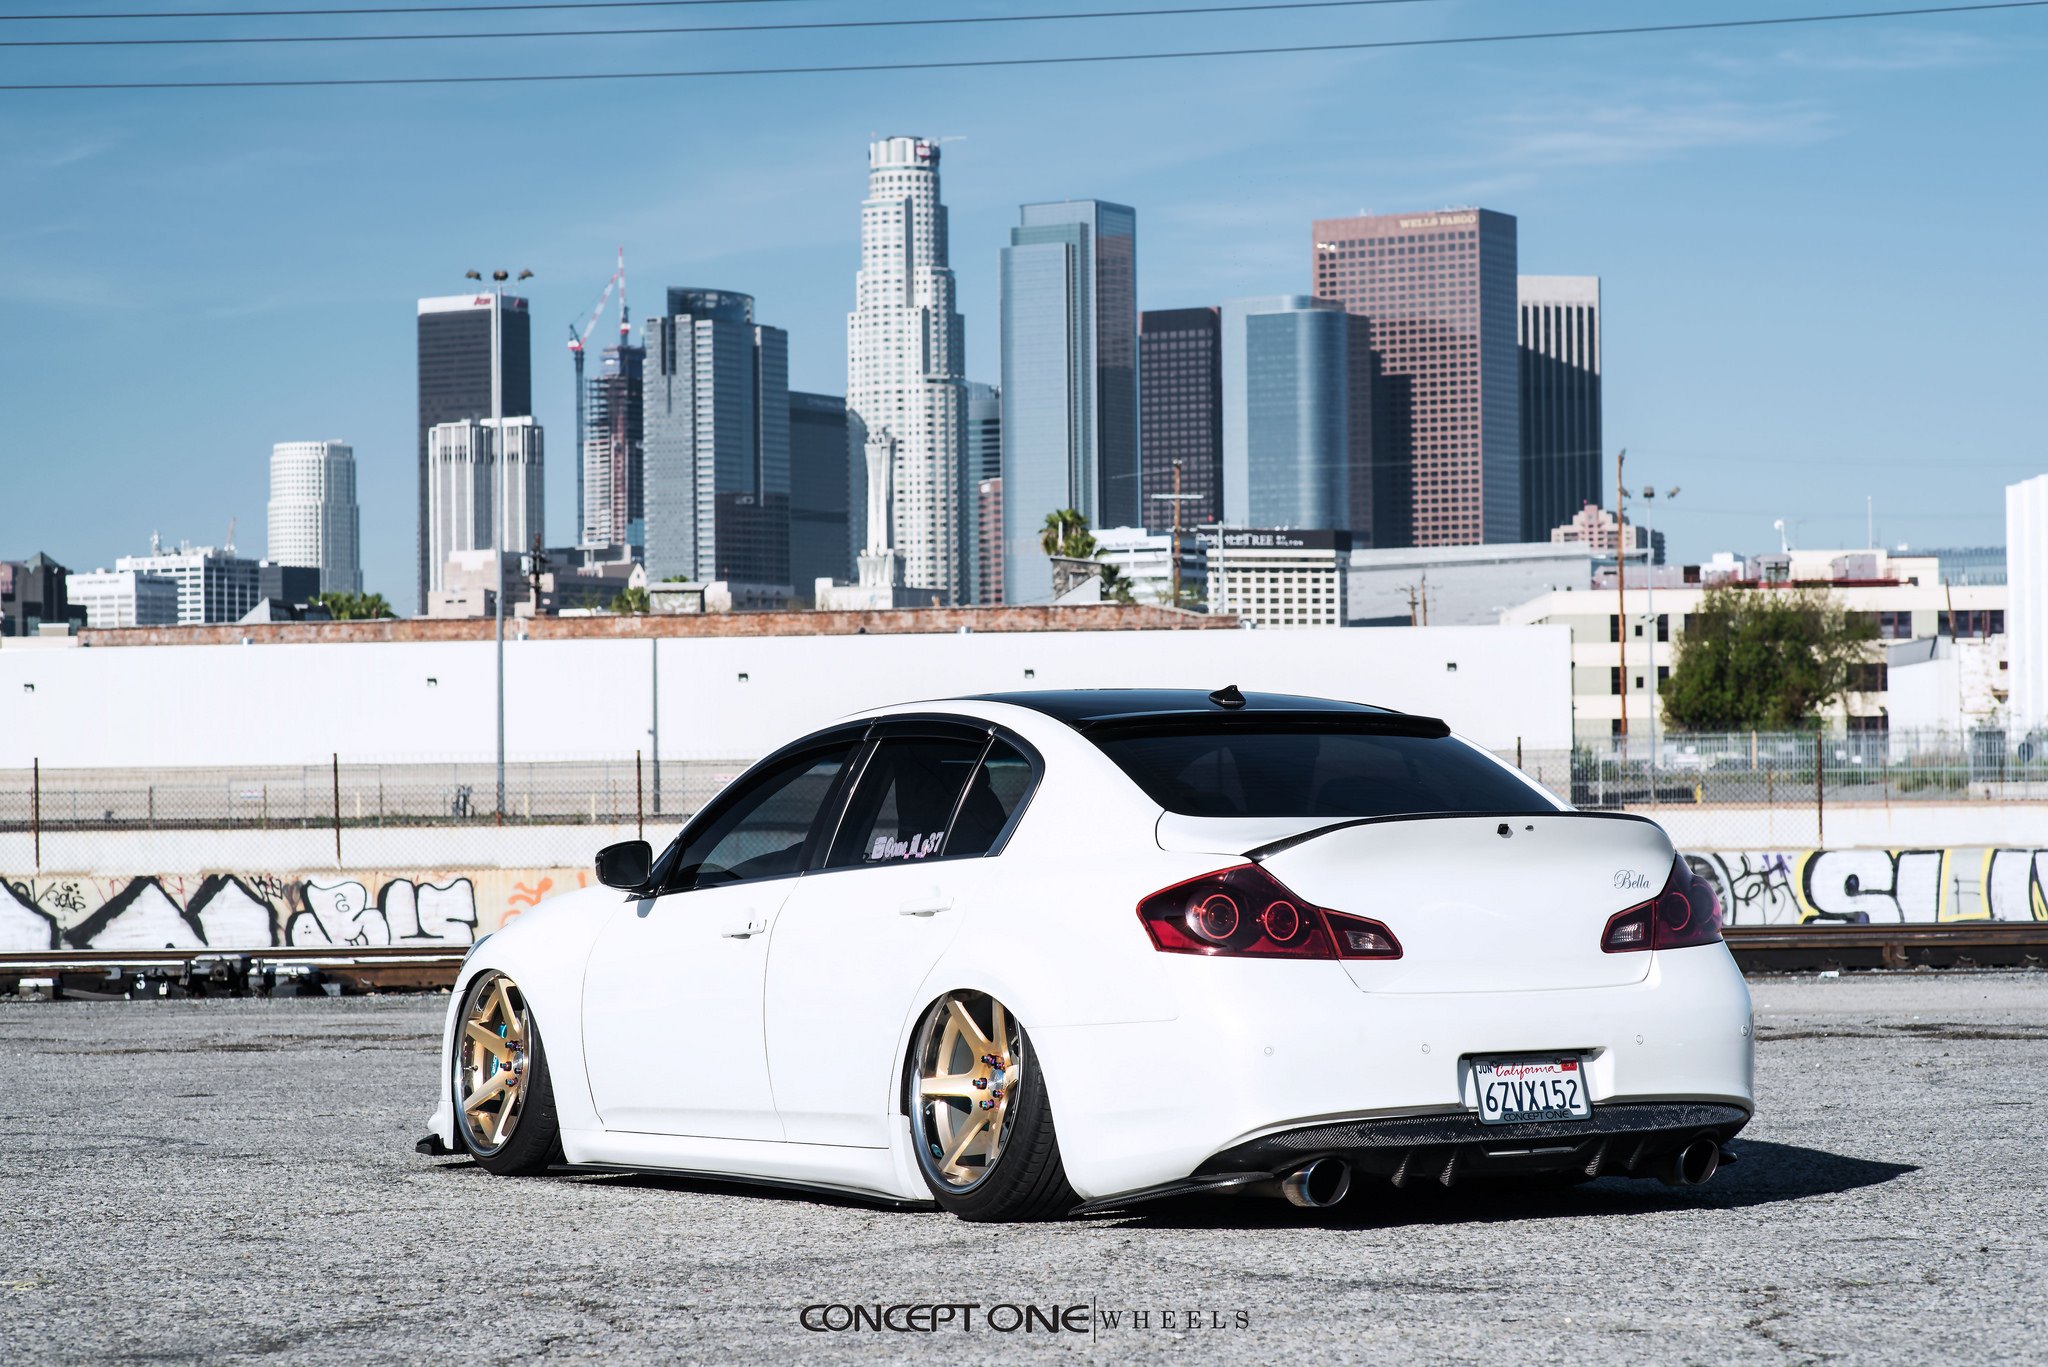 Bronze Concept One Wheels on White Infiniti G37 - Photo by Concept One